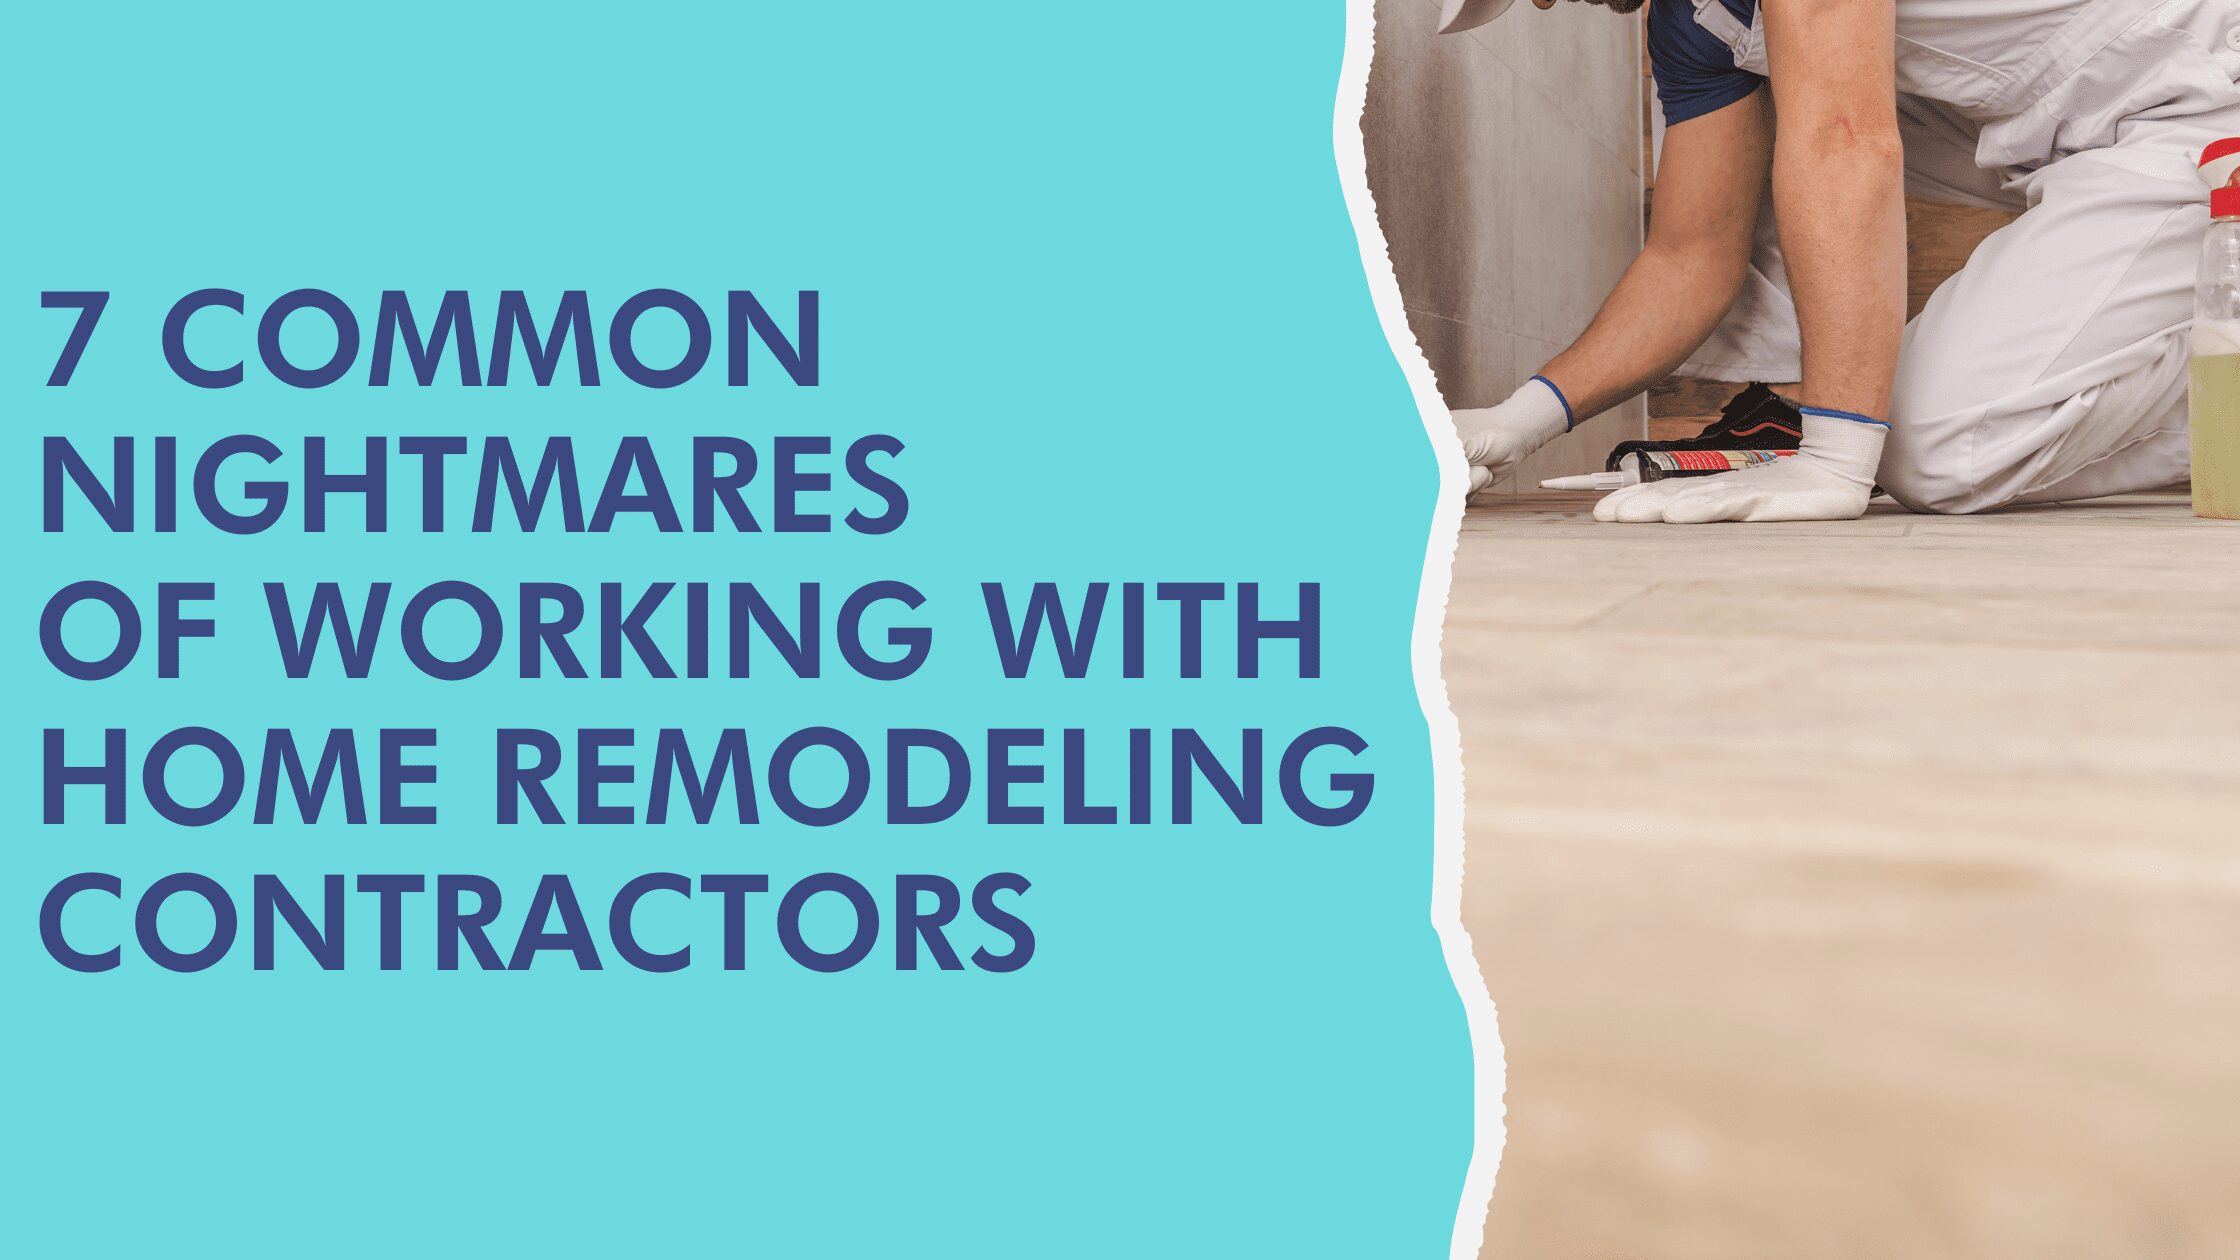 7 common nightmares of working with home remodeling contractors